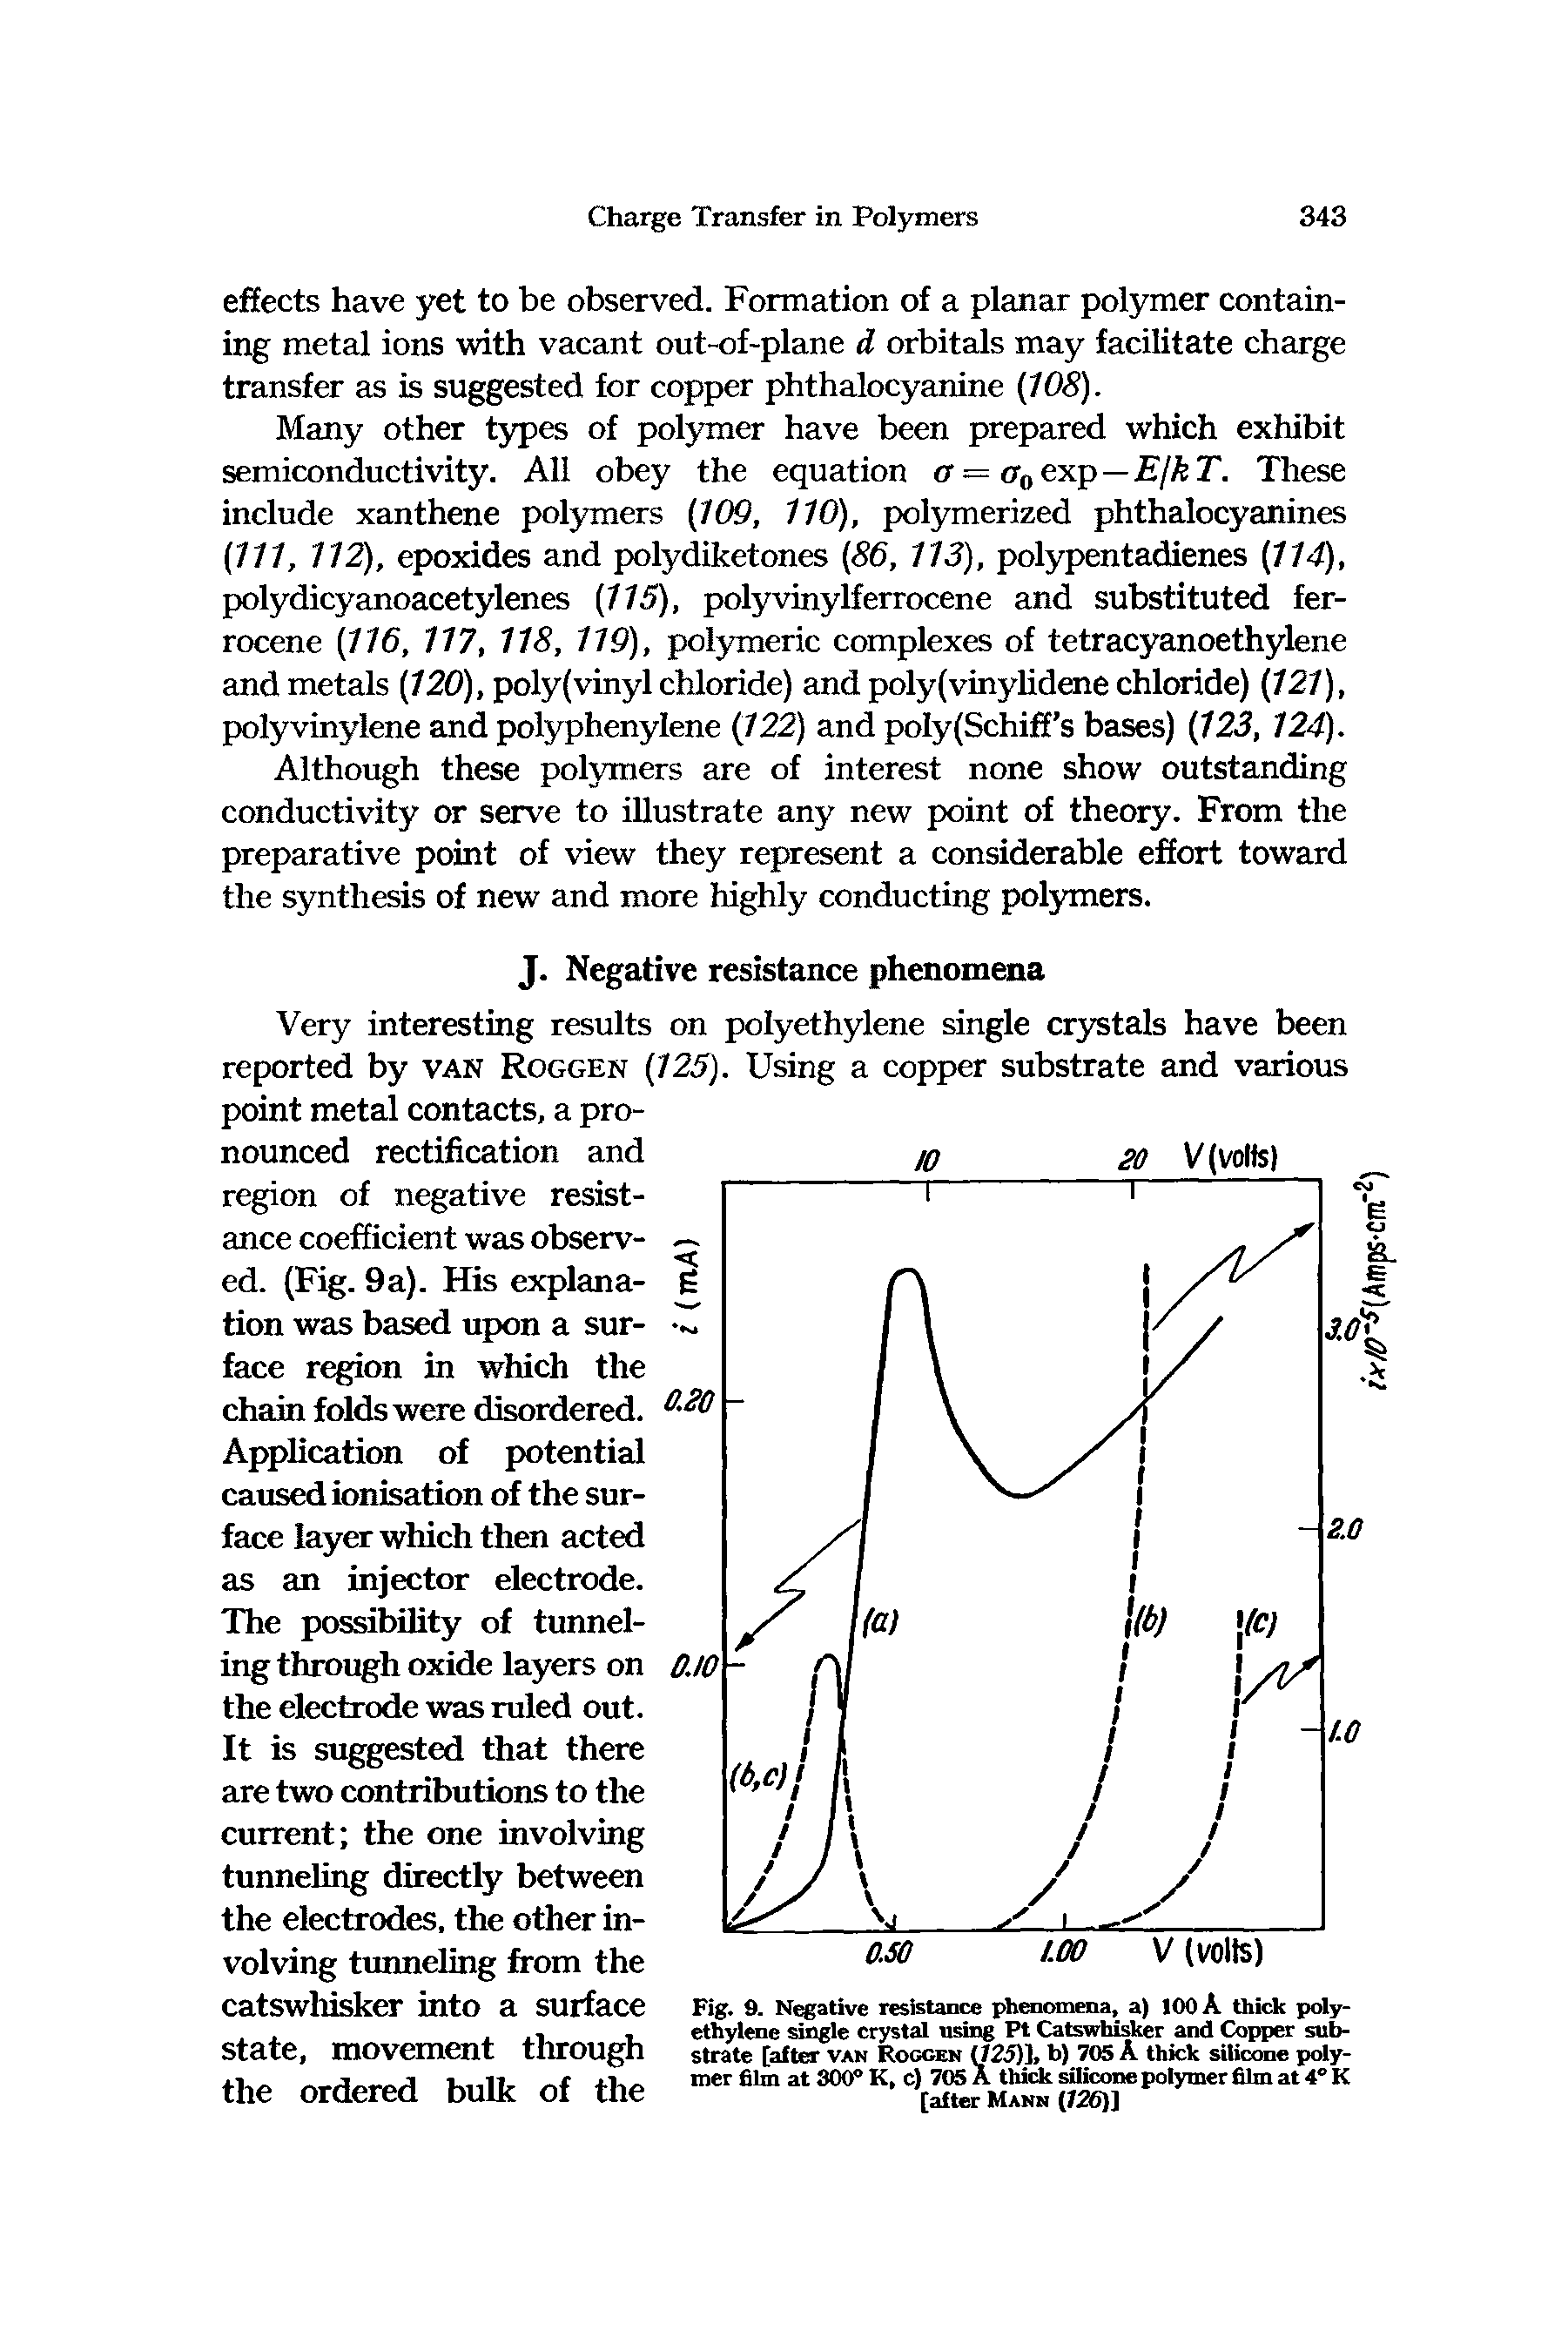 Fig. 9. Negative resistance phenomena, a) 100 A thick polyethylene single crystal using Pt Catswhisker and Copper substrate [after van Roggen (725)], b) 70S A thick silicone polymer film at 300° K, c) 705 A thick silicone polymer film at 4° K [after Mann (726)]...